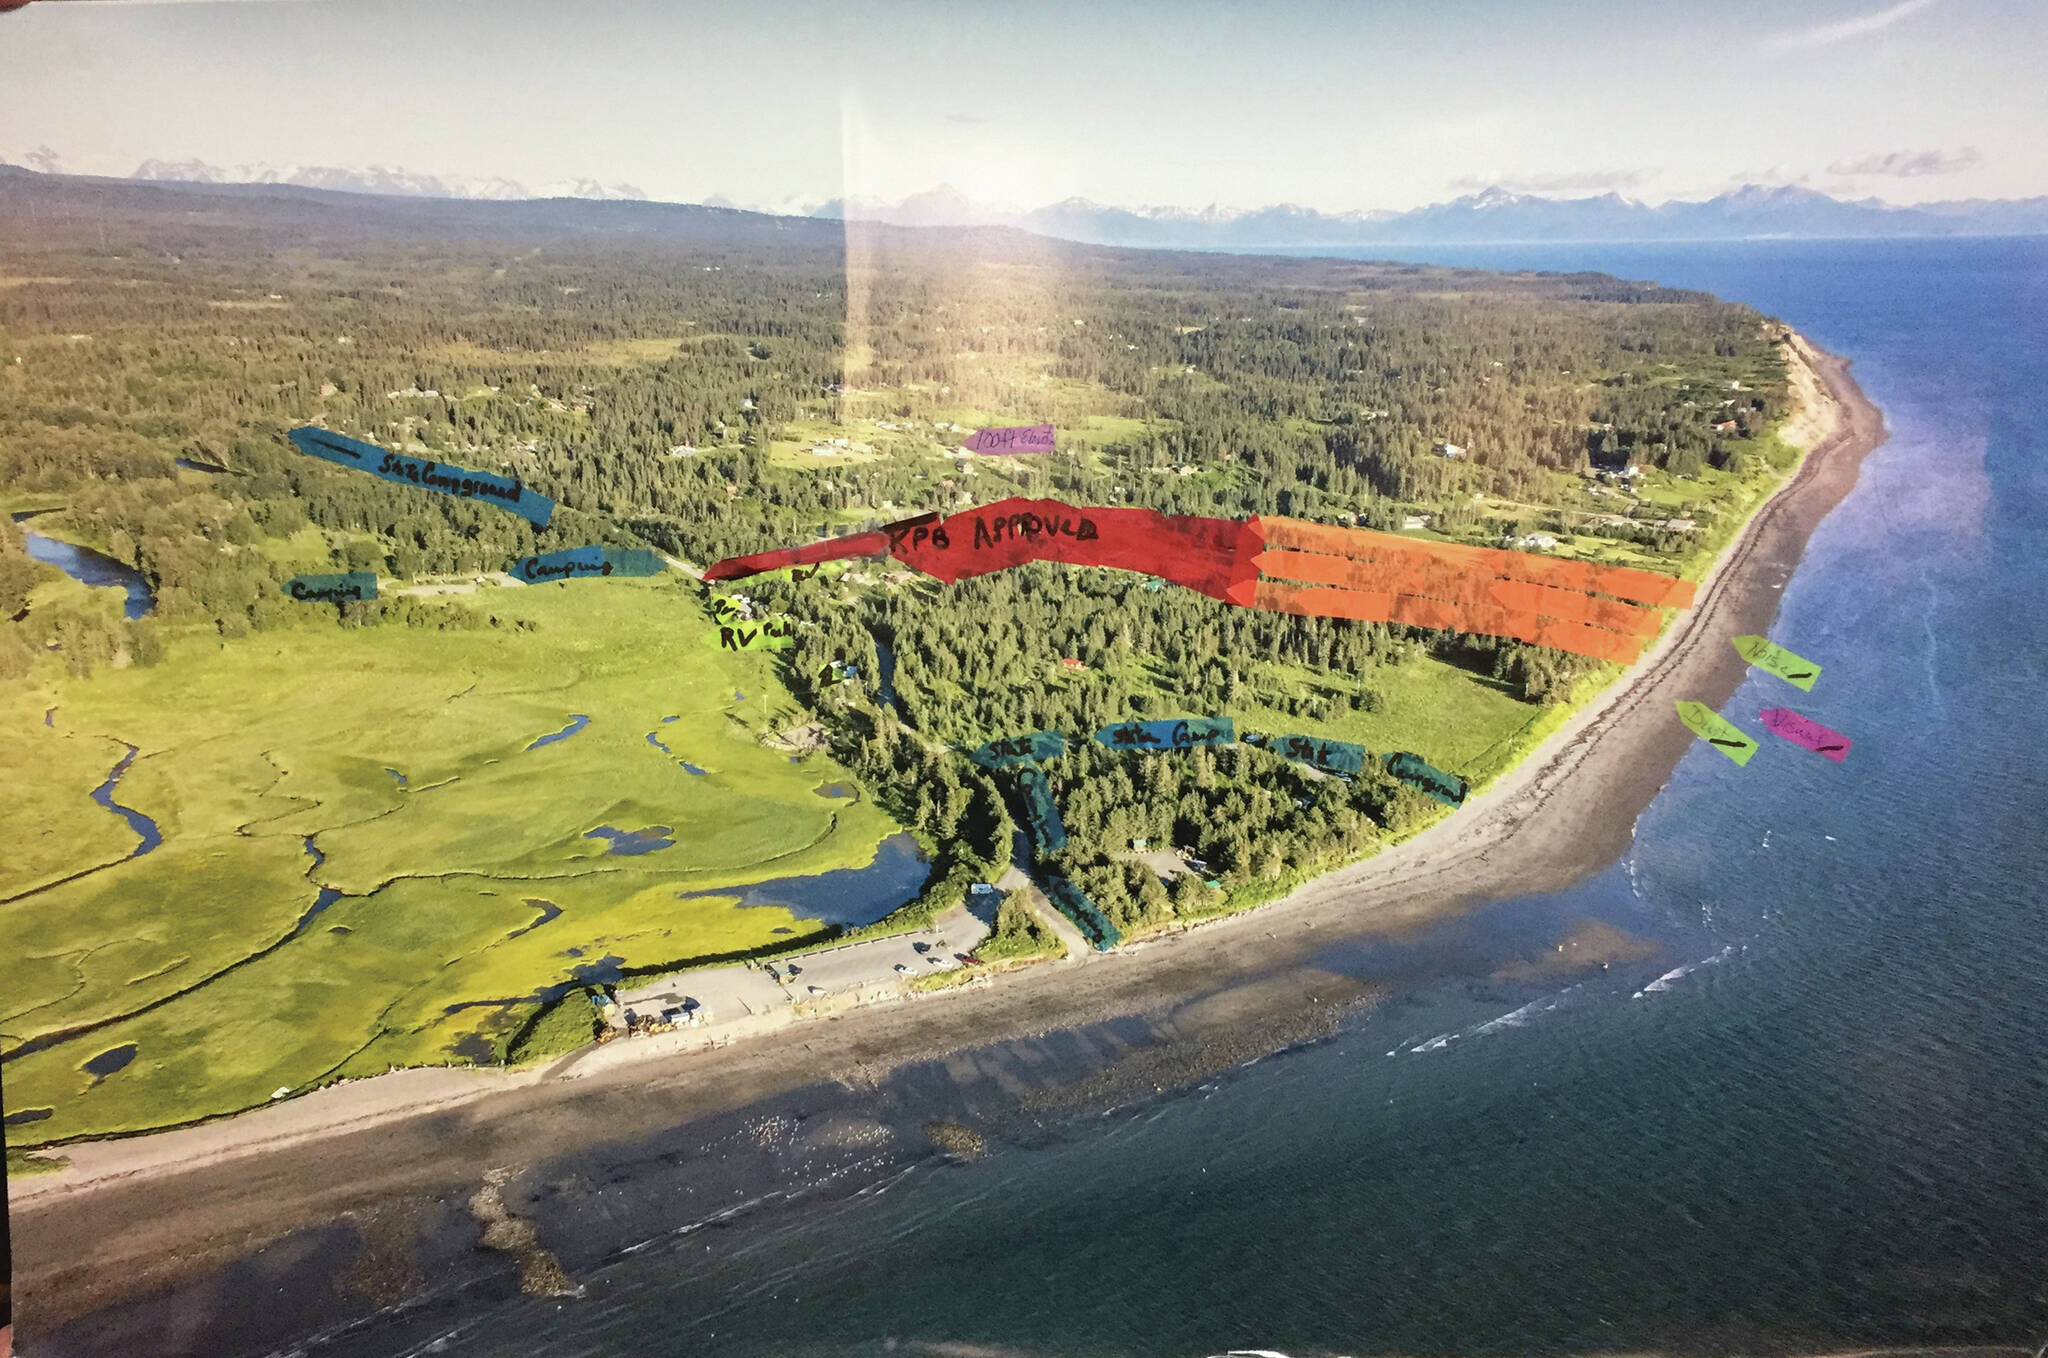 A diagram presented by Teresa Jacobson Gregory illustrates the proposed extension of the Beachcomber LLC gravel pit and the impact it may have on the surrounding state recreation area. The red markers indicate the current gravel mining area, and the orange represents the area the extension may allow for mining if approved. (Image courtesy Teresa Jacobson Gregory)